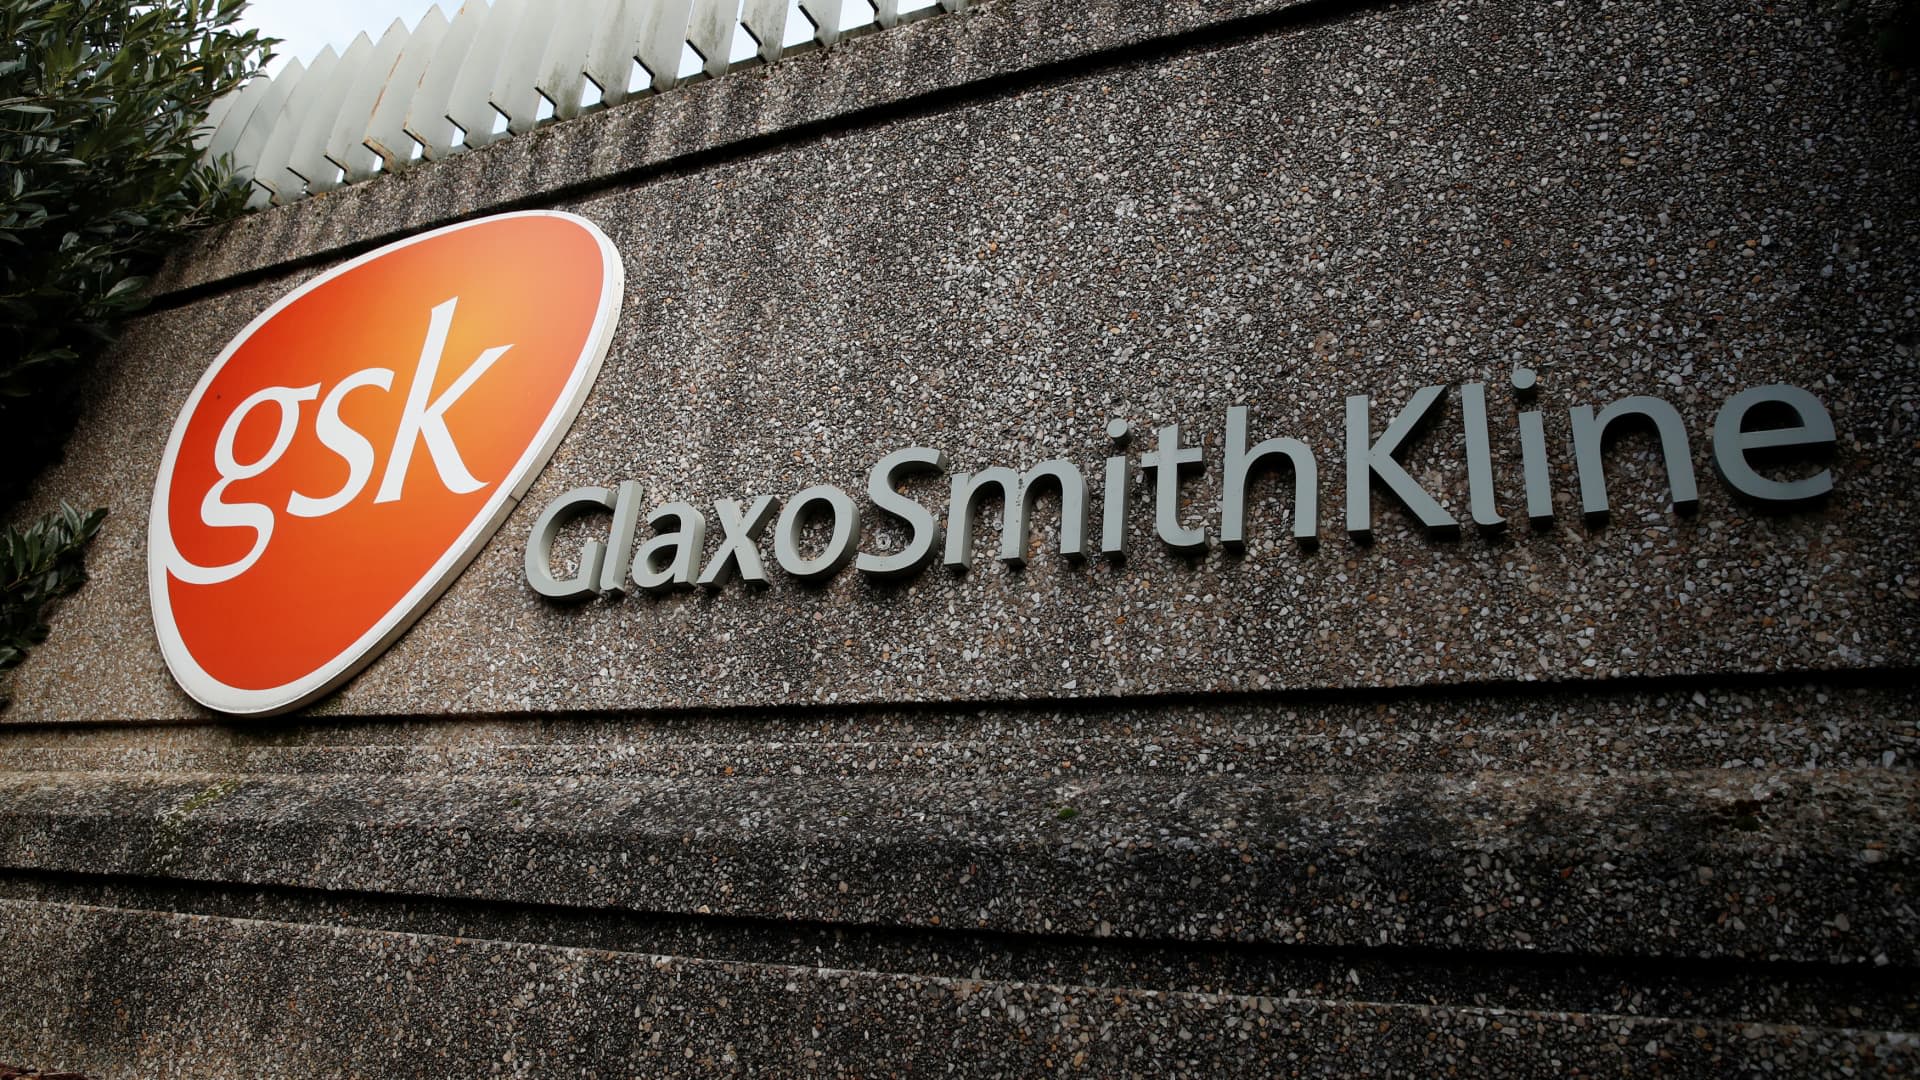 Pharma giant GSK plunges 9% after U.S. court allows scientific testimony in Zantac lawsuits